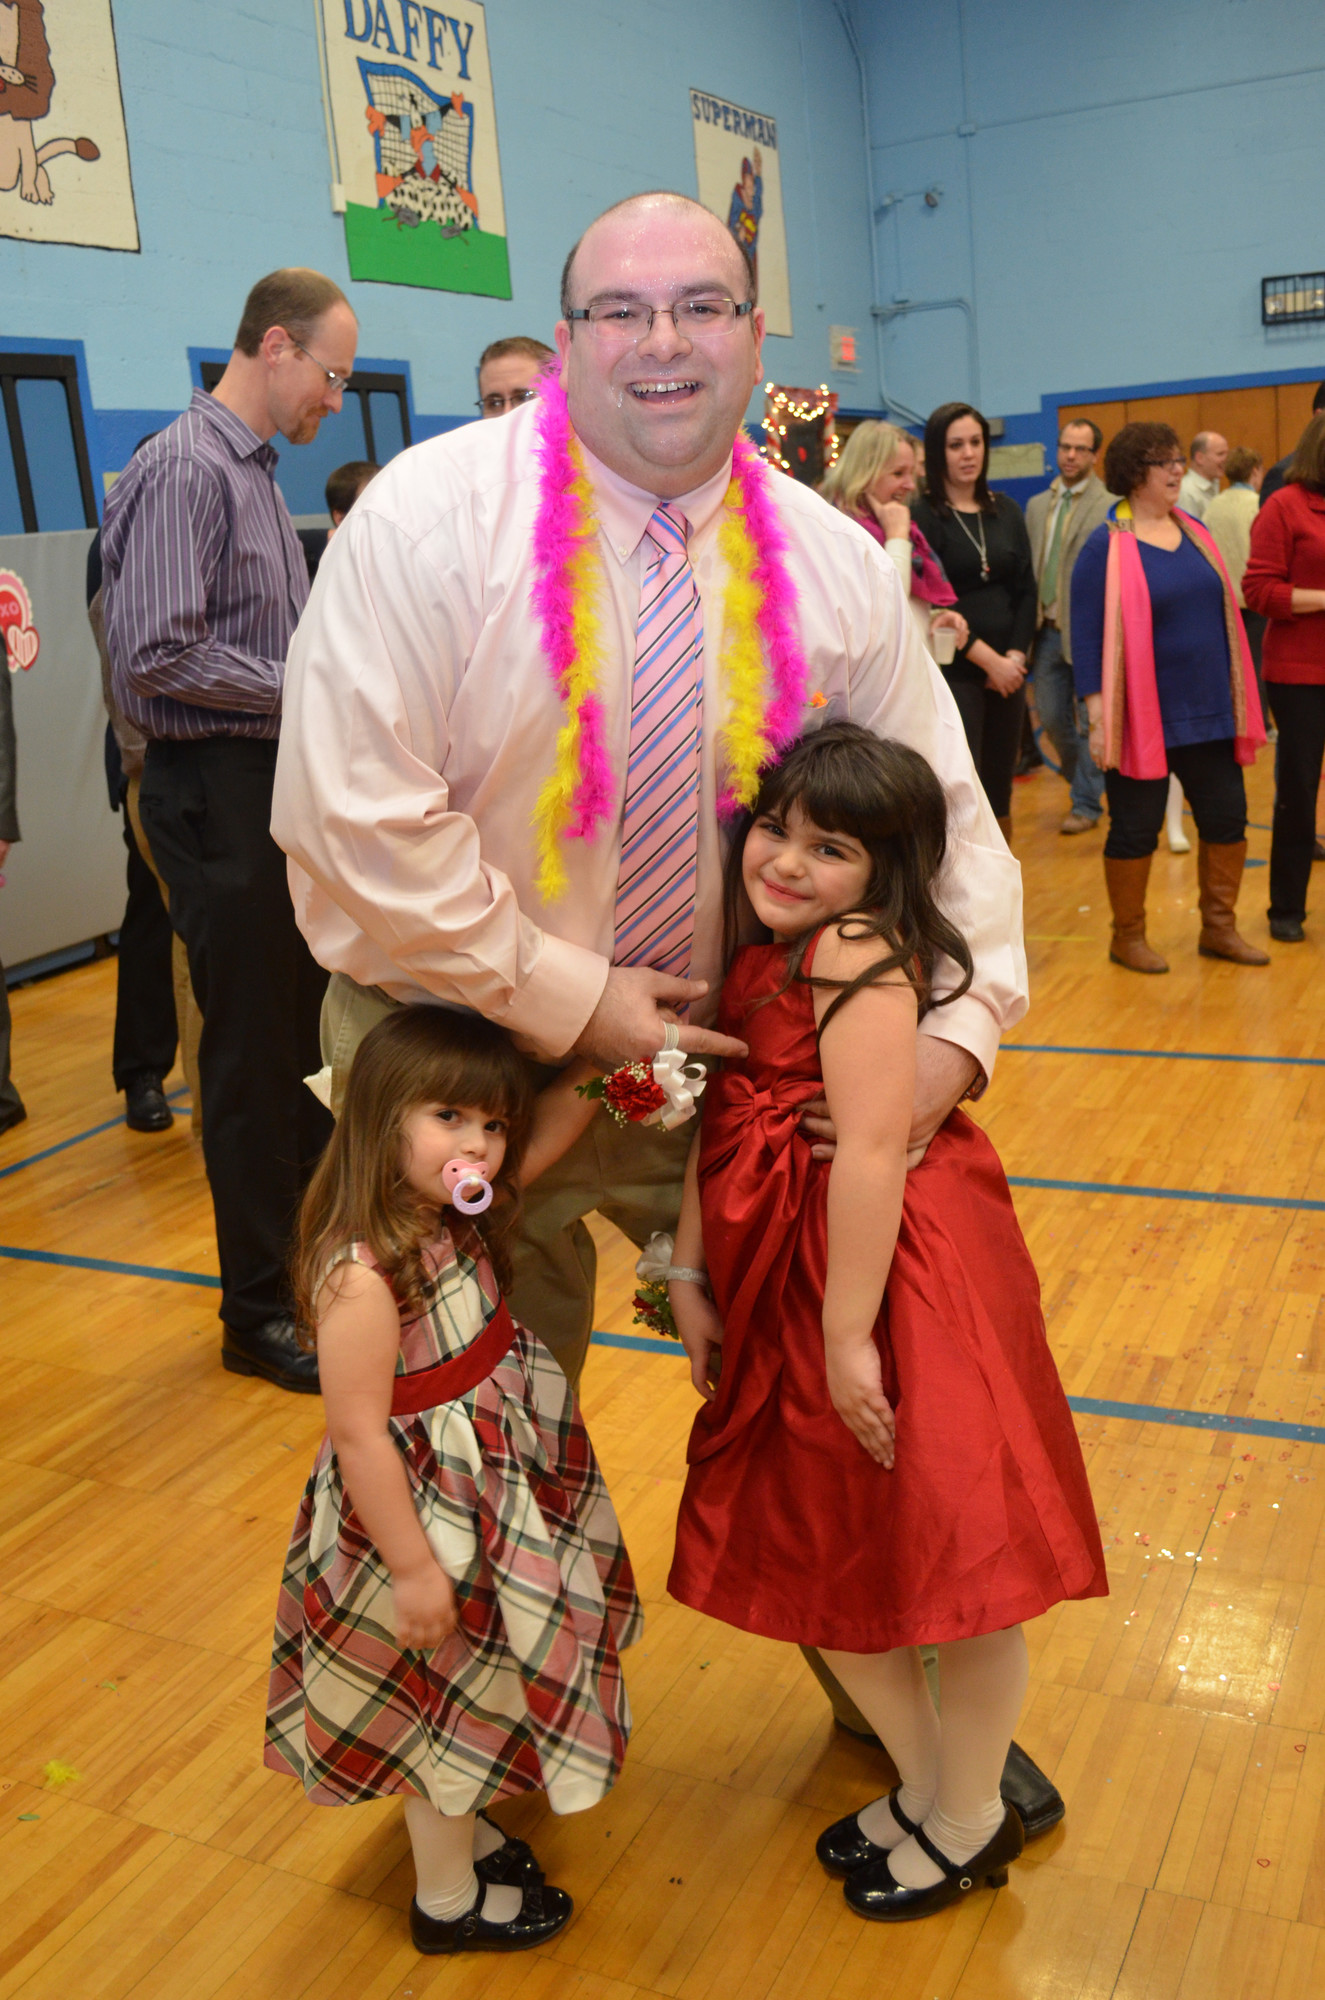 Rich Petrone danced with his daughters Lily, right, who is in first grade, and Emma.